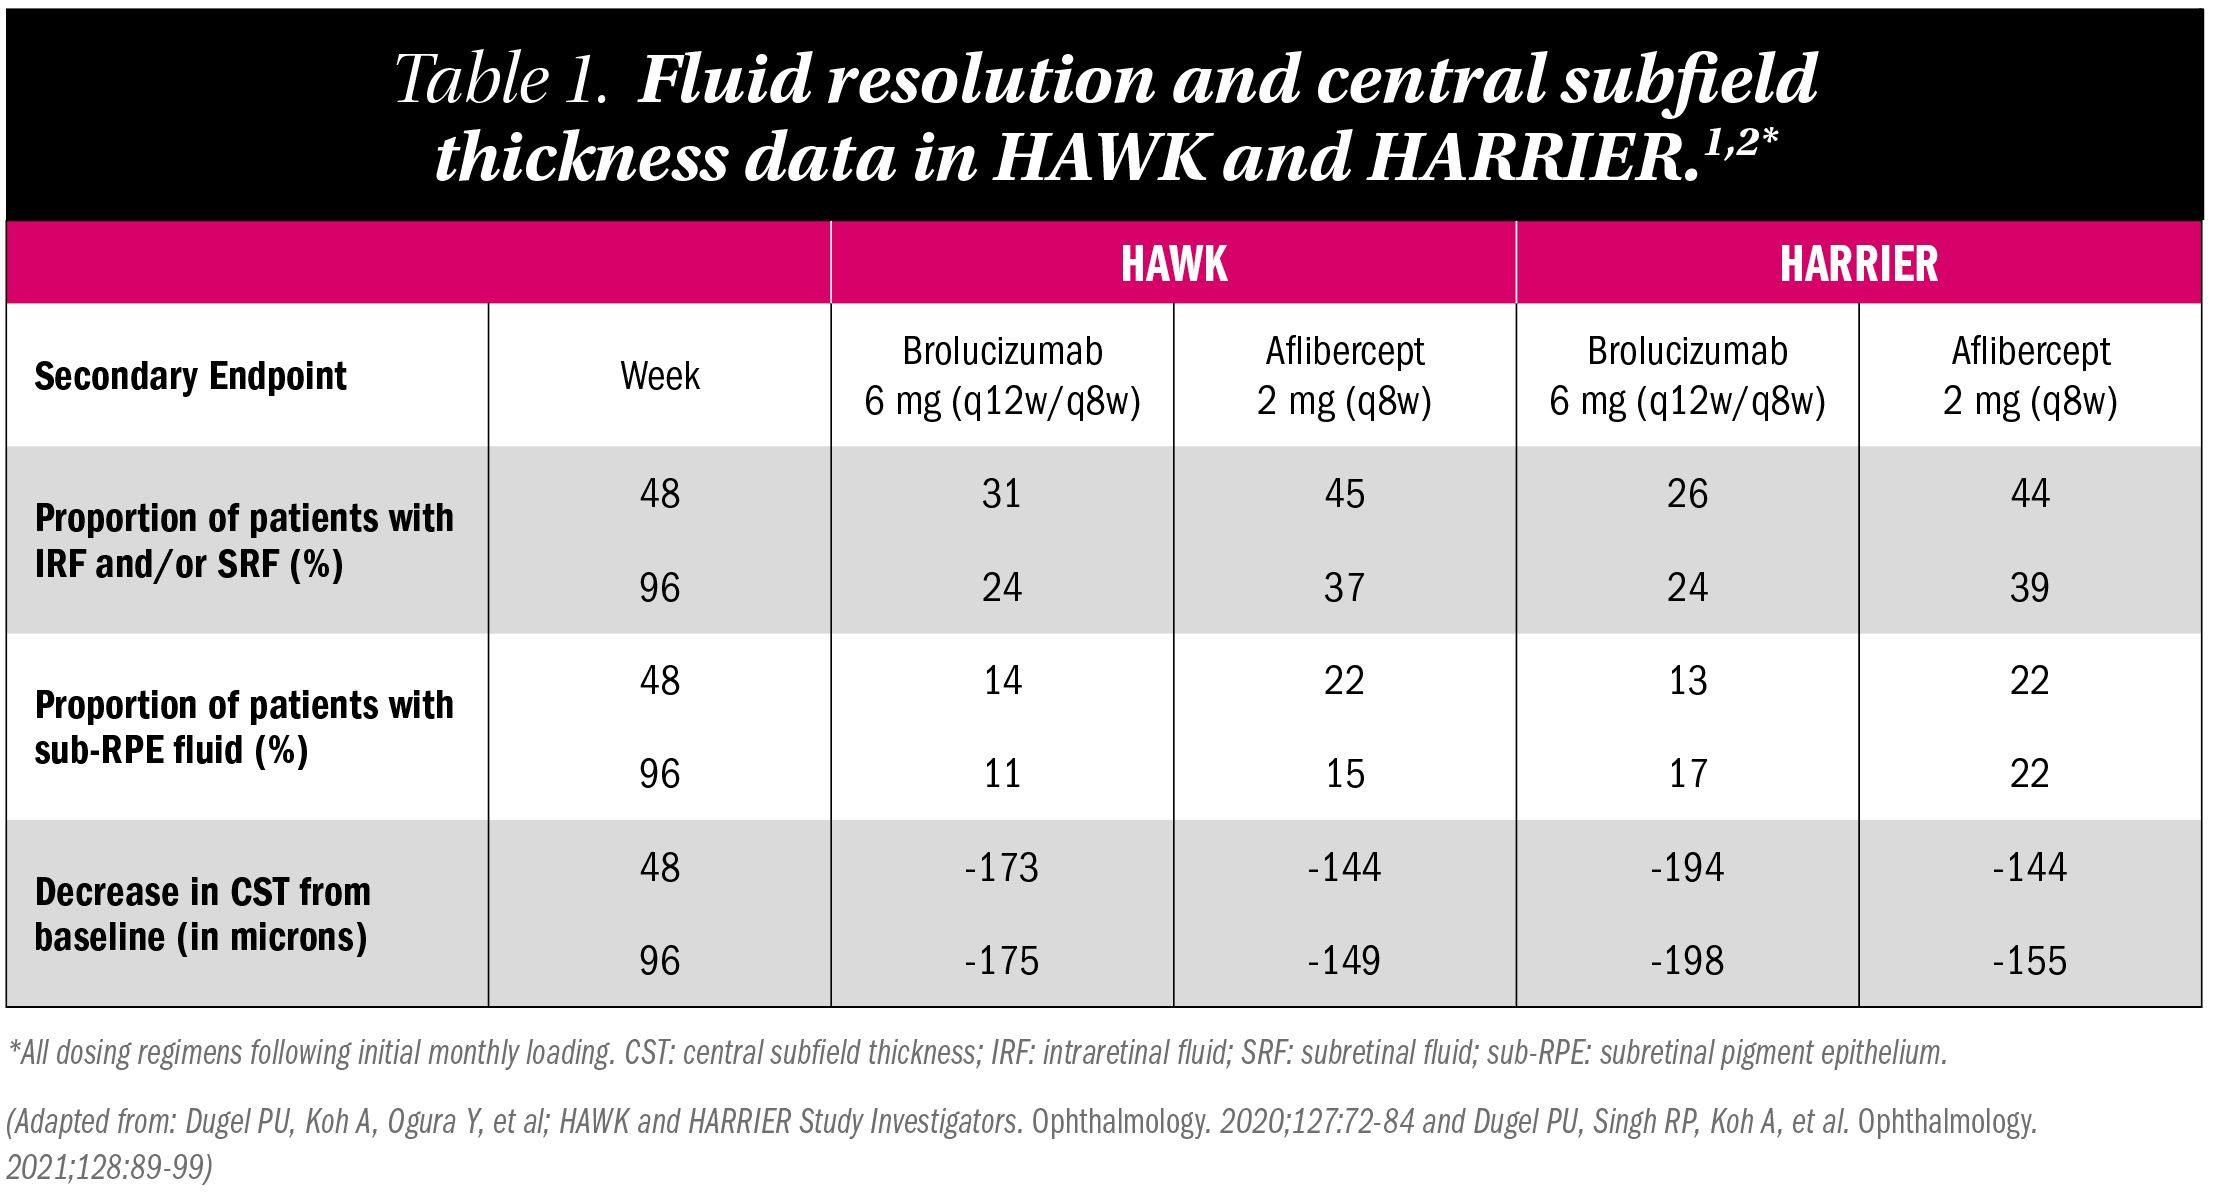 Table showing fluid resolution and central subfield thickness data in HAWK and HARRIER